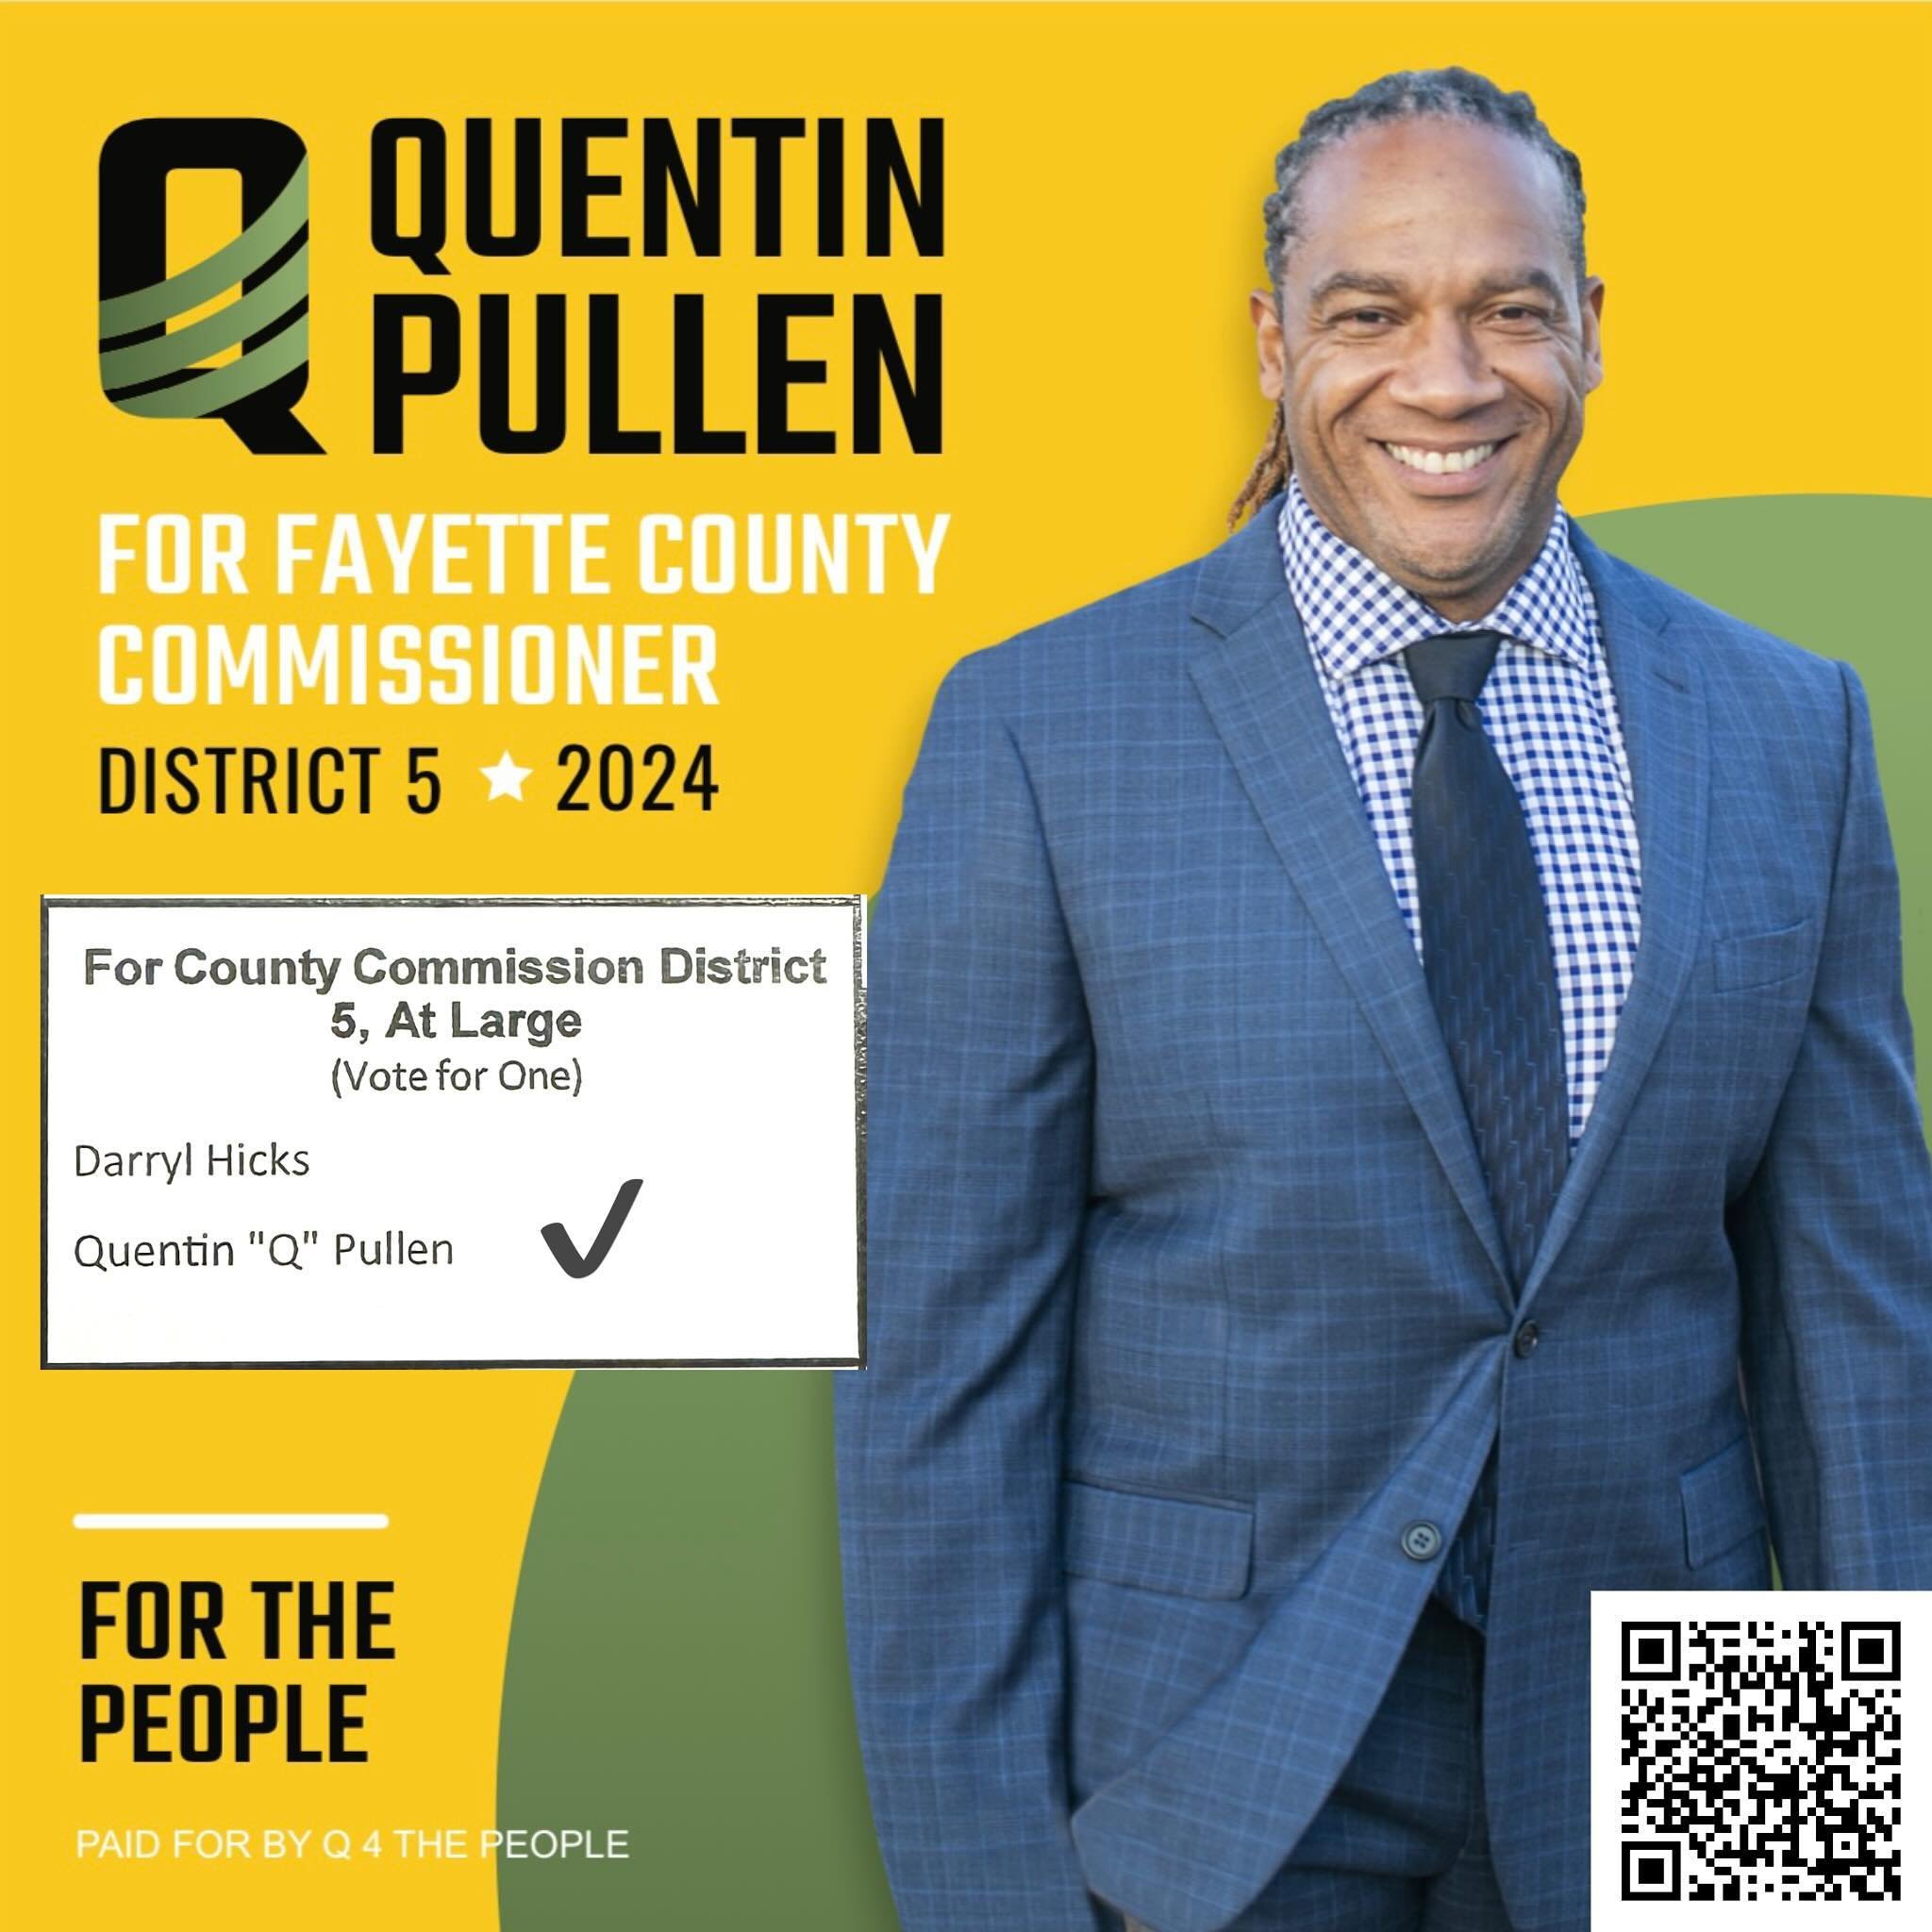 Early voting CONTINUES!!! If you haven&rsquo;t voted WHAT ARE YOU WAITING FOR? Go vote tomorrow and bring a few friends along with you. Tell them to select Quentin &ldquo;Q&rdquo; Pullen to advance to the November election! I look forward to represen